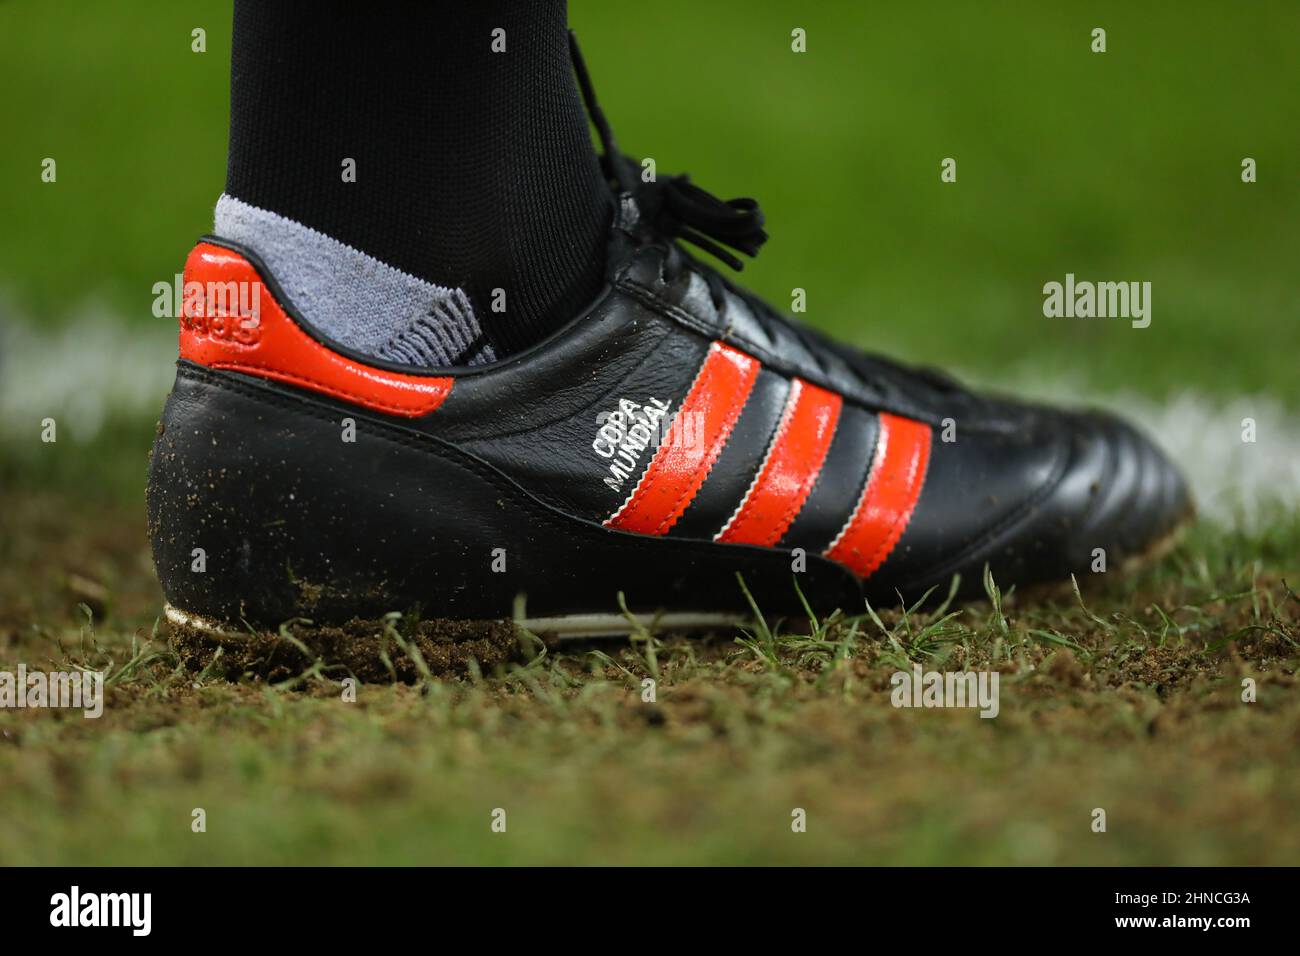 Adidas Orange Striped Copa Mundial boot - Norwich City v Manchester City, Premier League, Carrow Road, Norwich, UK - 12th February 2022  Editorial Use Only - DataCo restrictions apply Stock Photo